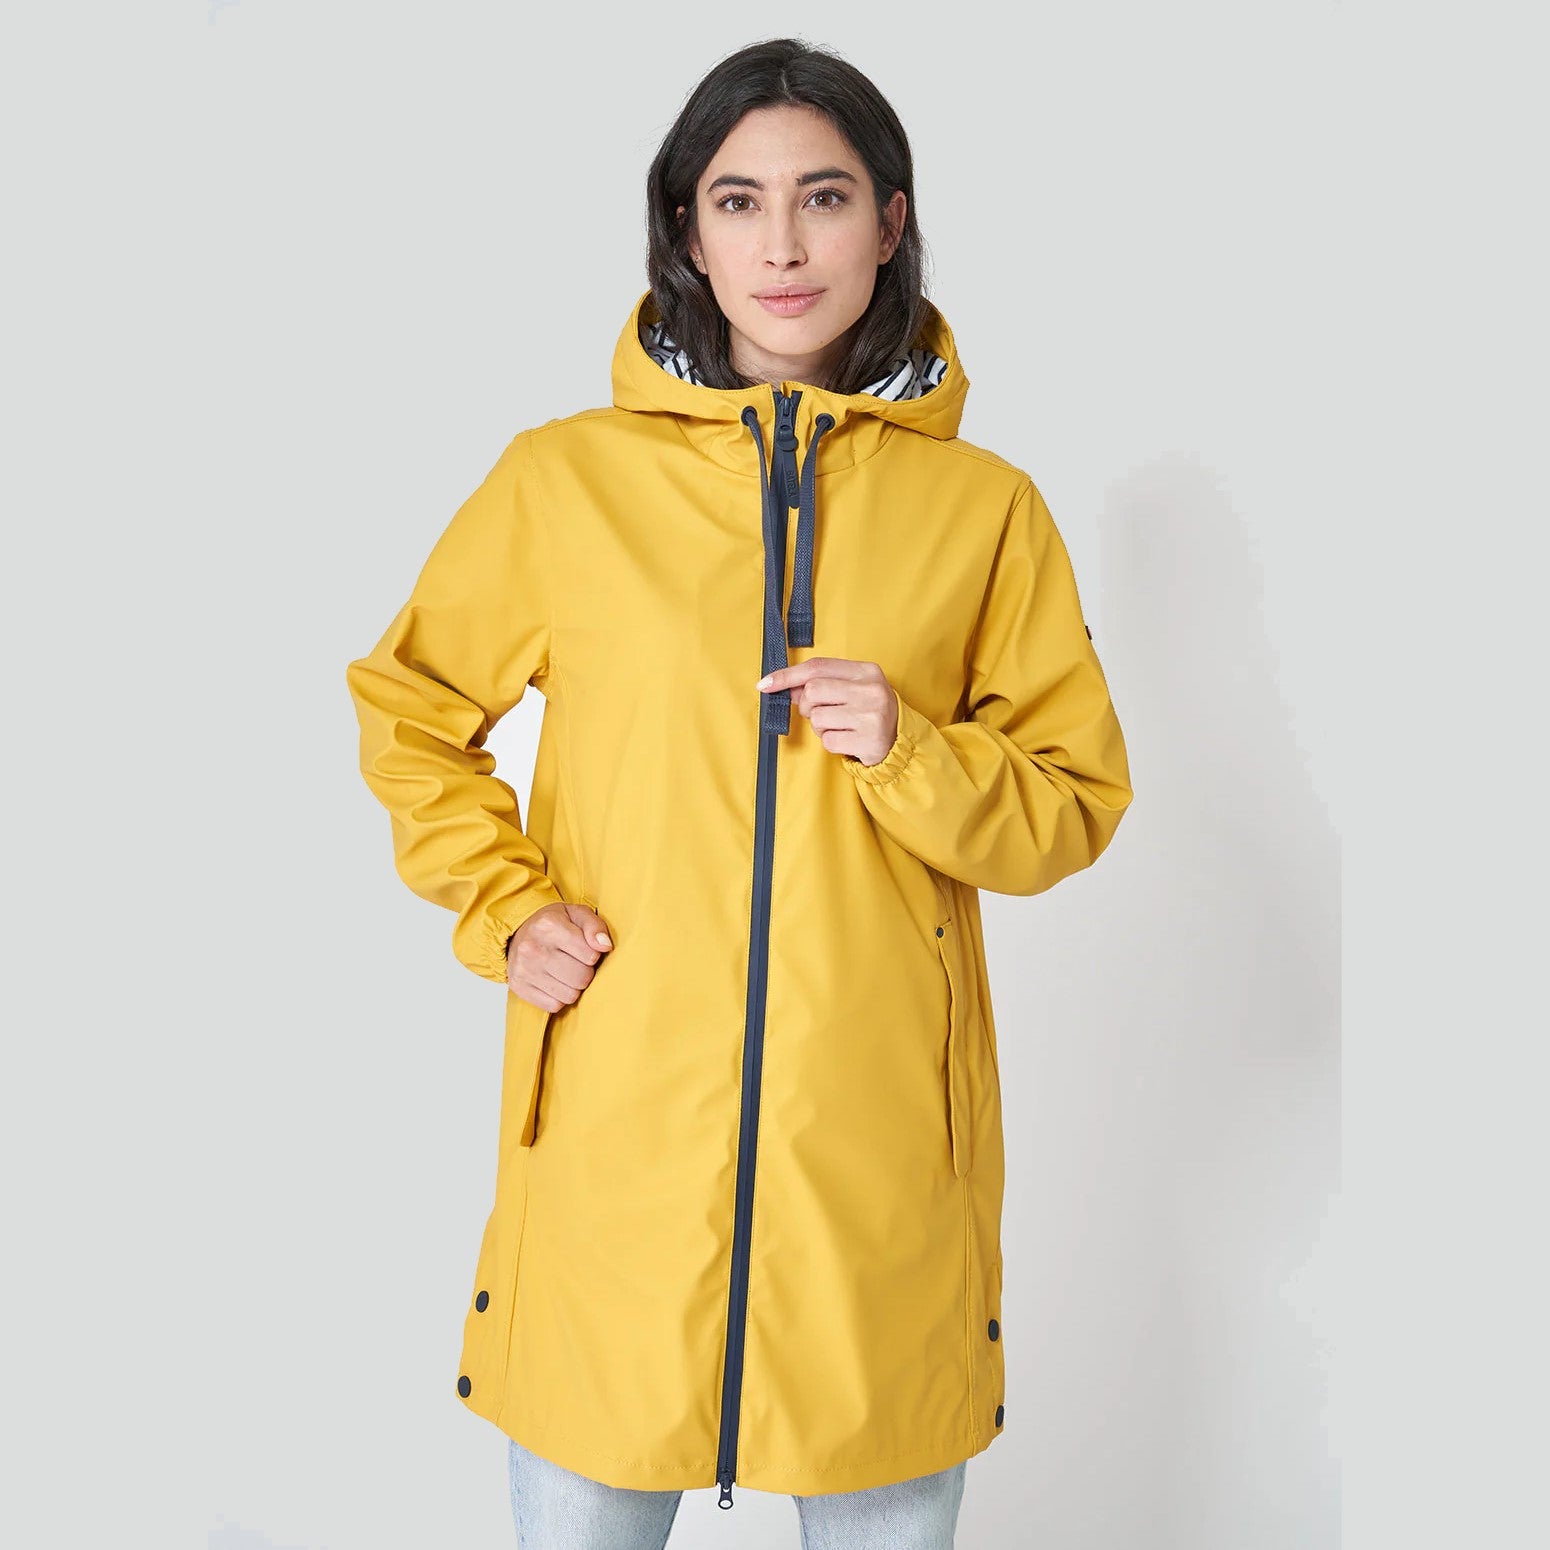 Raincoat with Striped Fleece Lining for Women